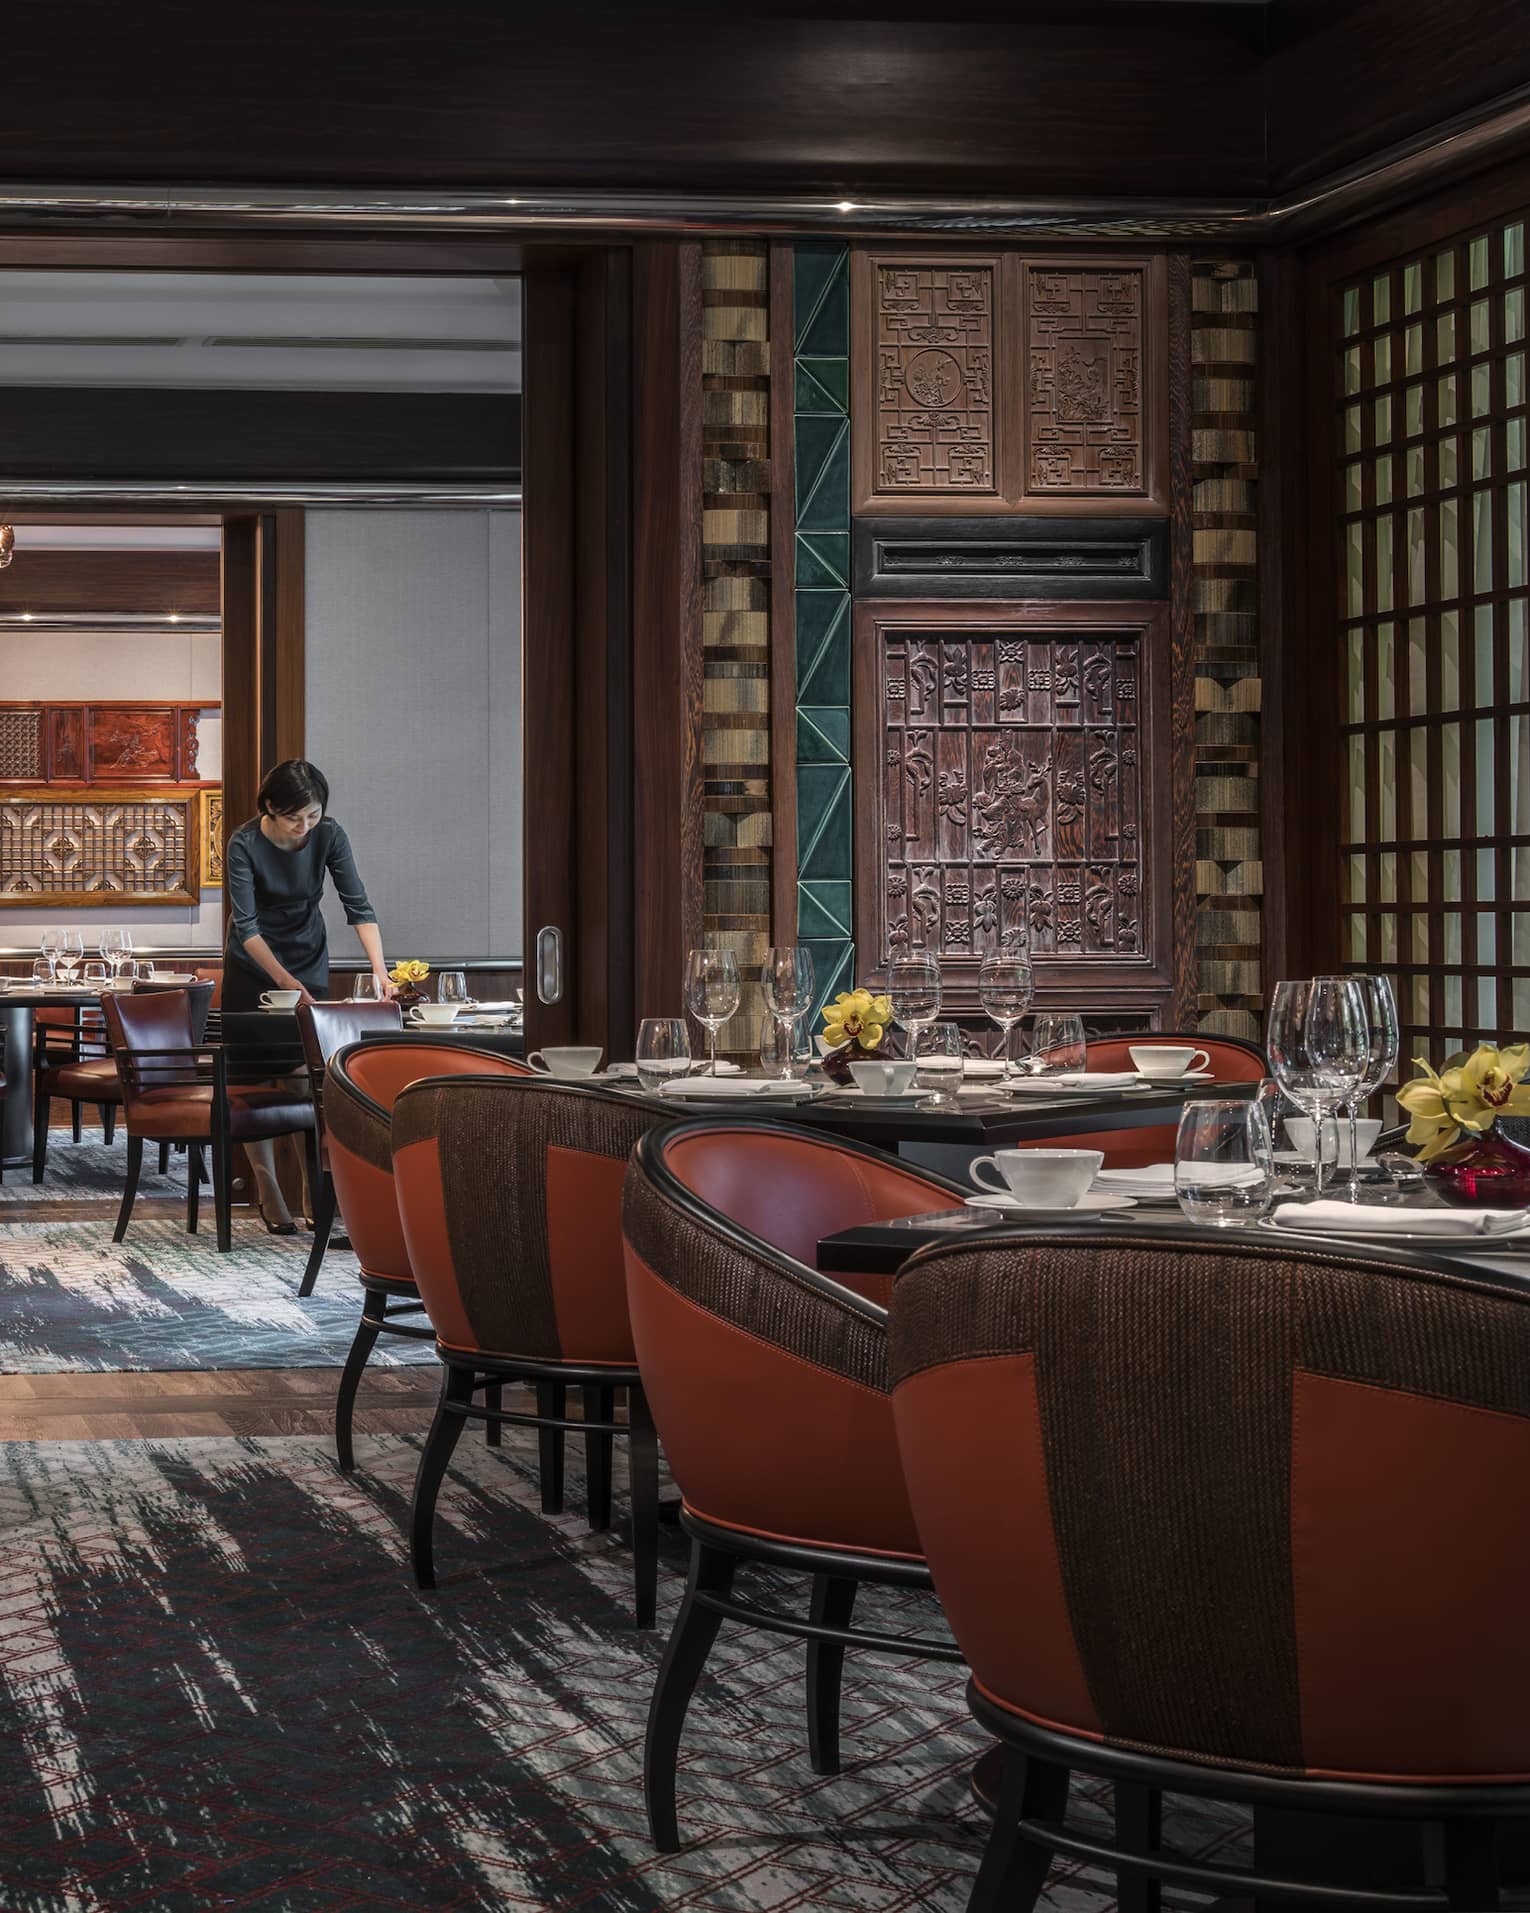 Woman sets table at Jiang-Nan Chun, Michelin-starred Cantonese restaurant, with red leather bucket chairs around dining tables, carved wood walls.